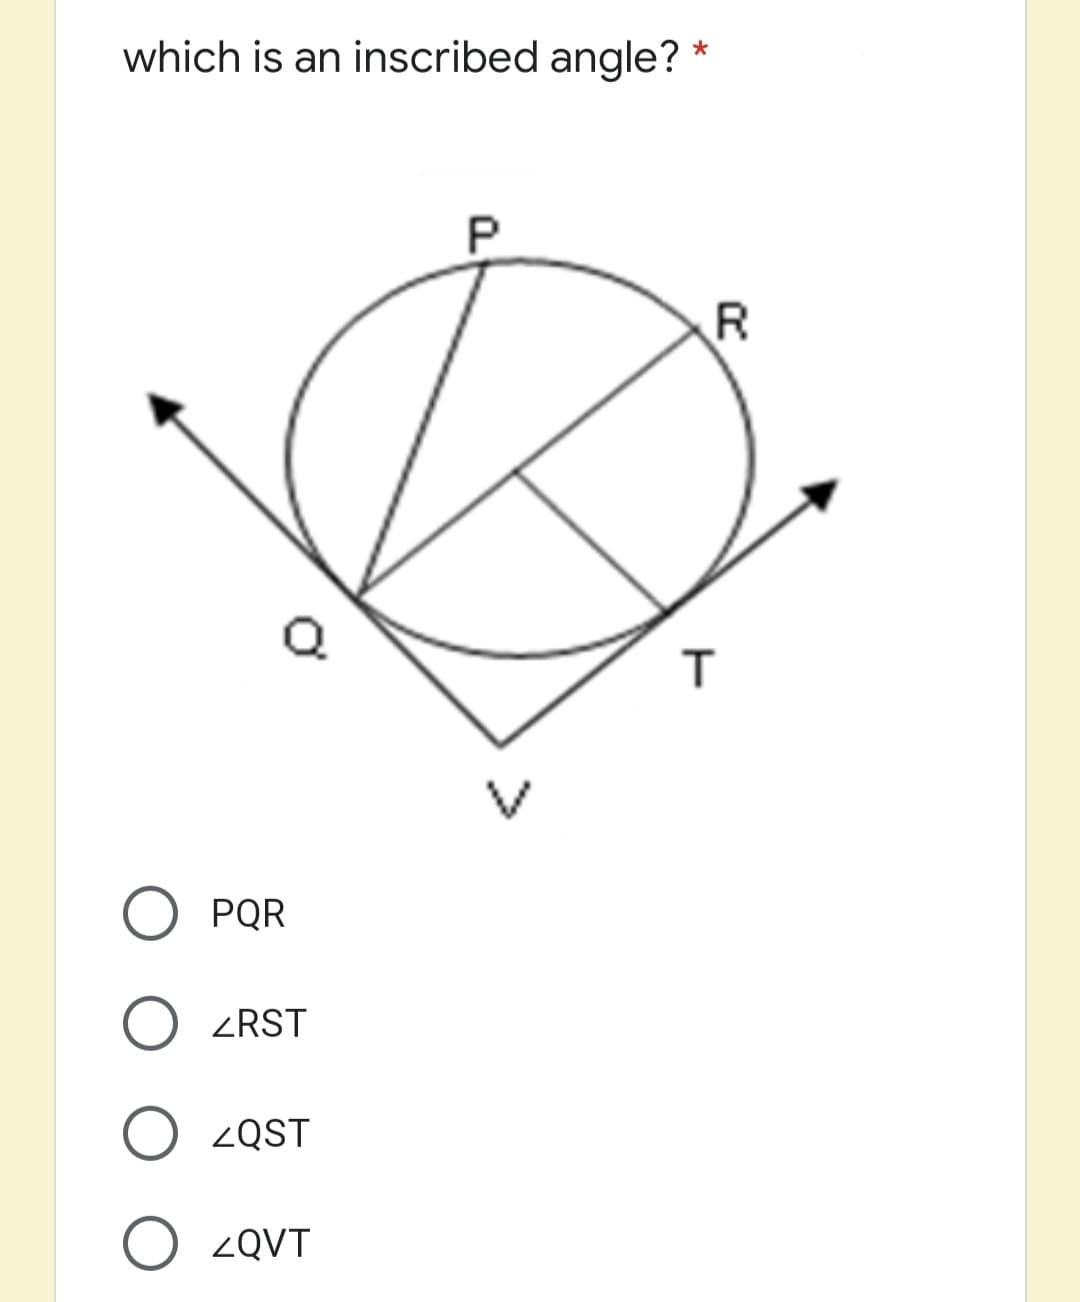 which is an inscribed angle?
*
PQR
ZRST
O 2QST
O 2QVT
